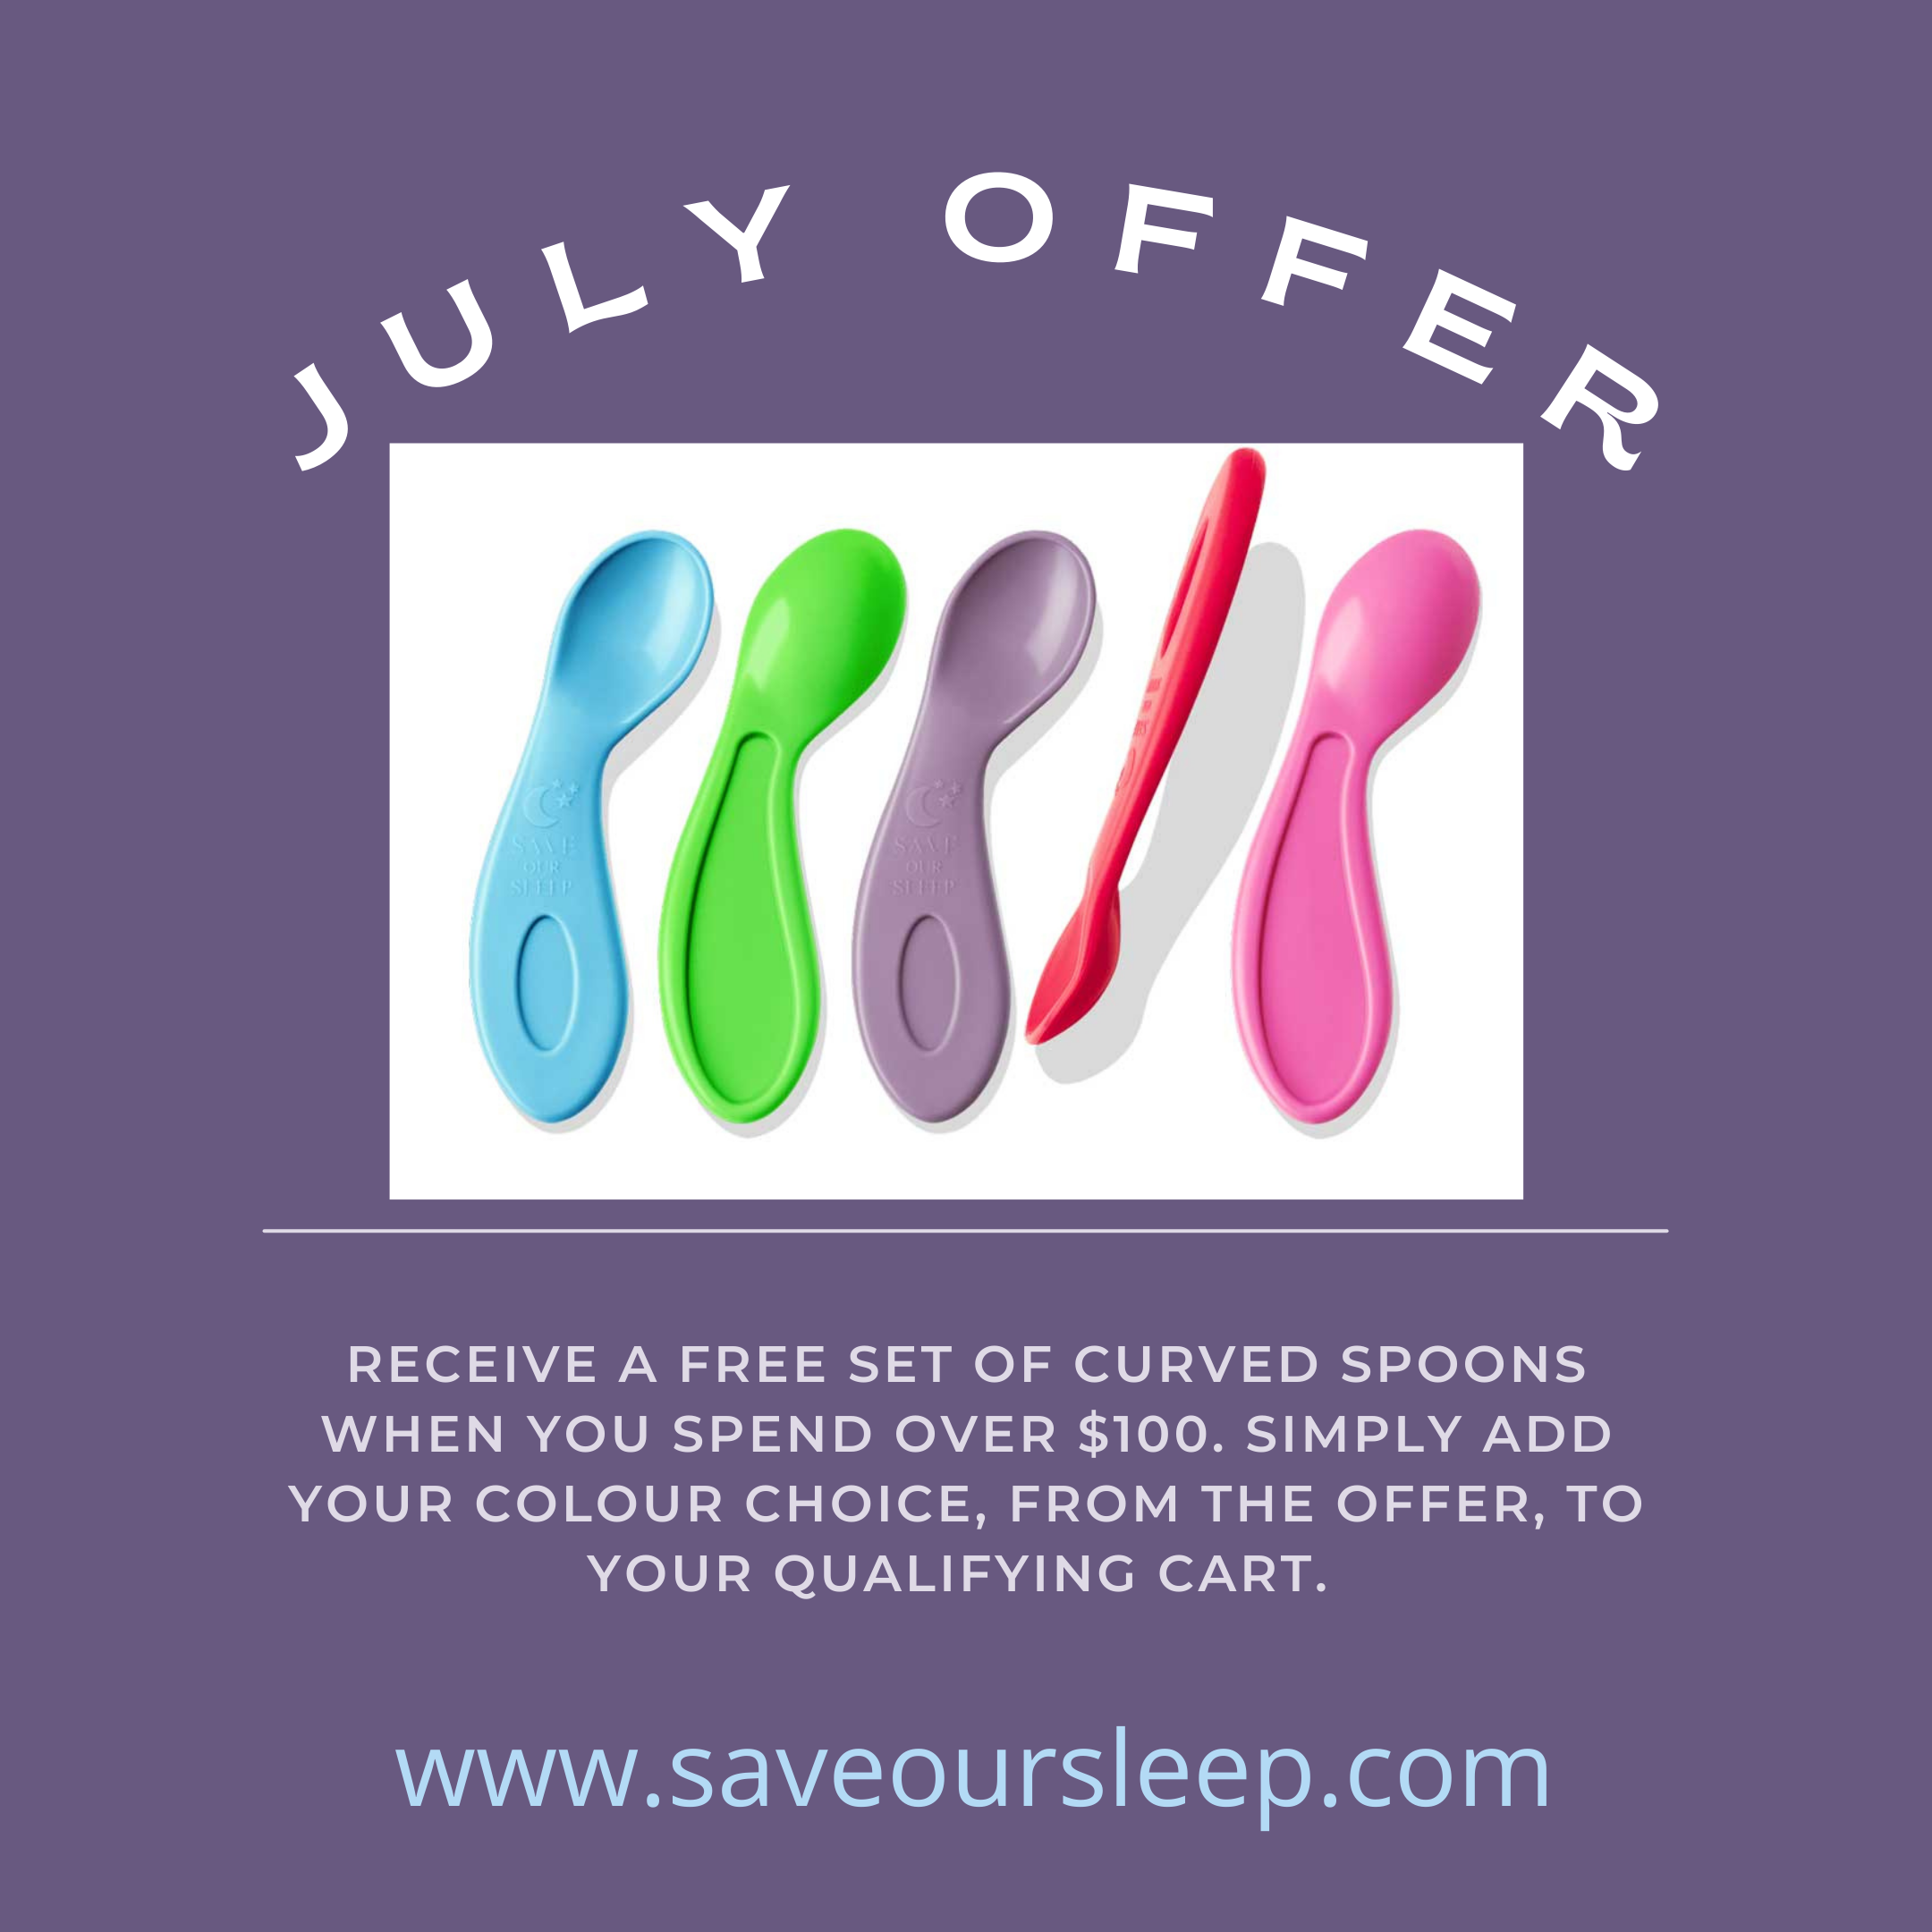 July Offer -  FREE set of spoons when spending over $100. 